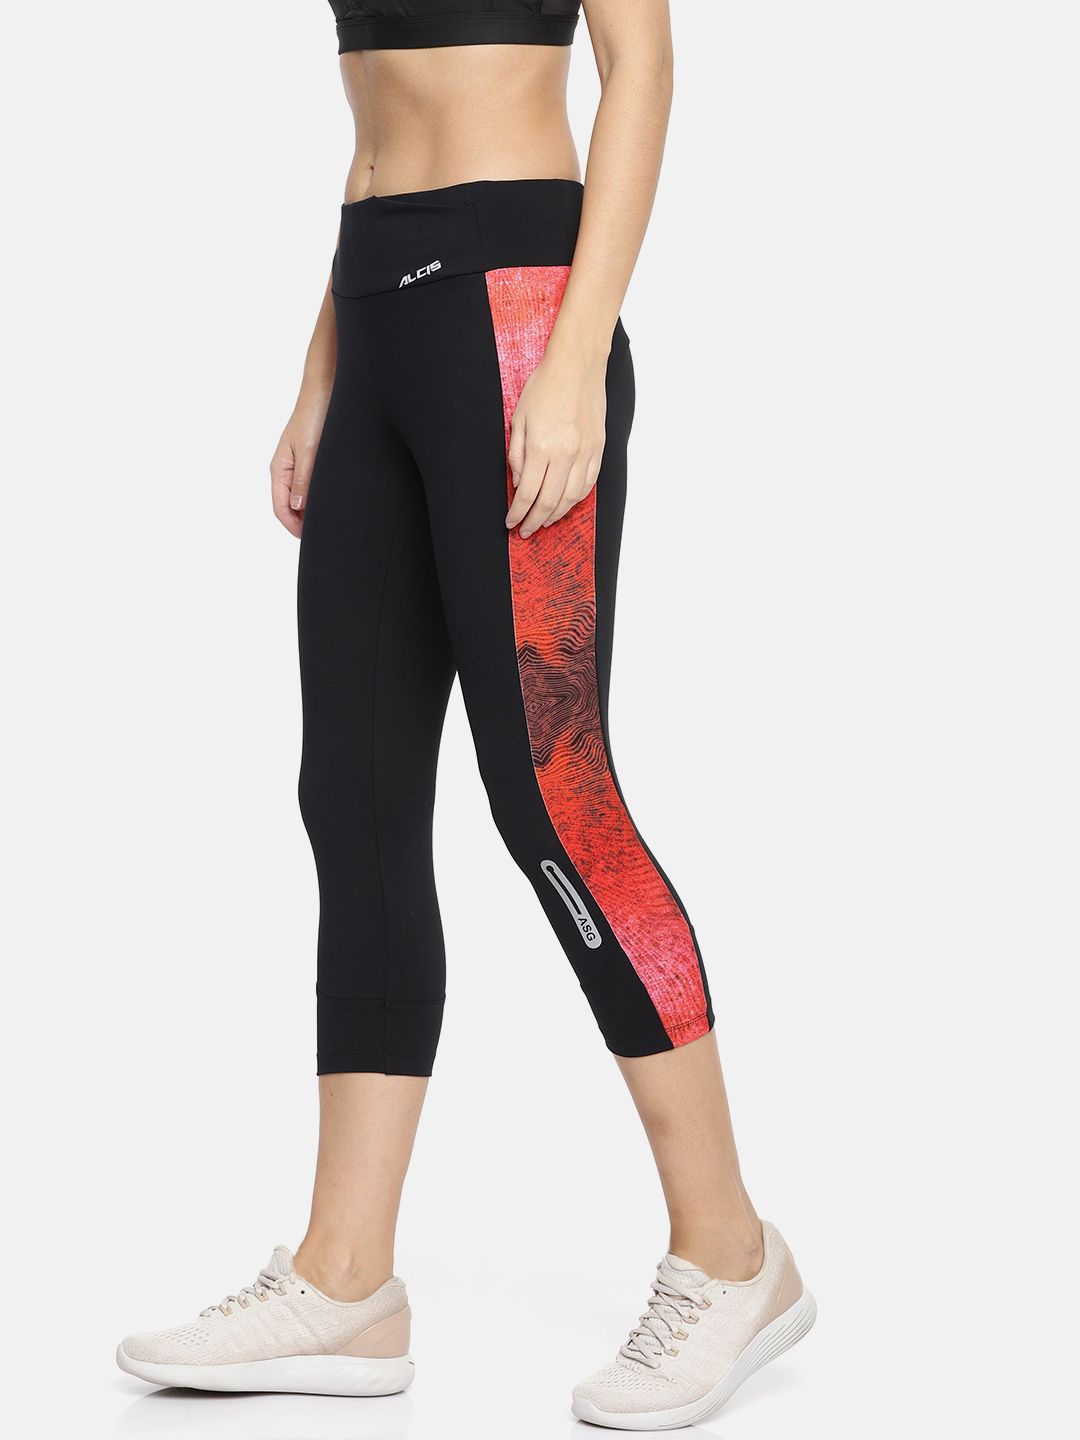 ASICS Women Black and Red Printed Tights Price in India